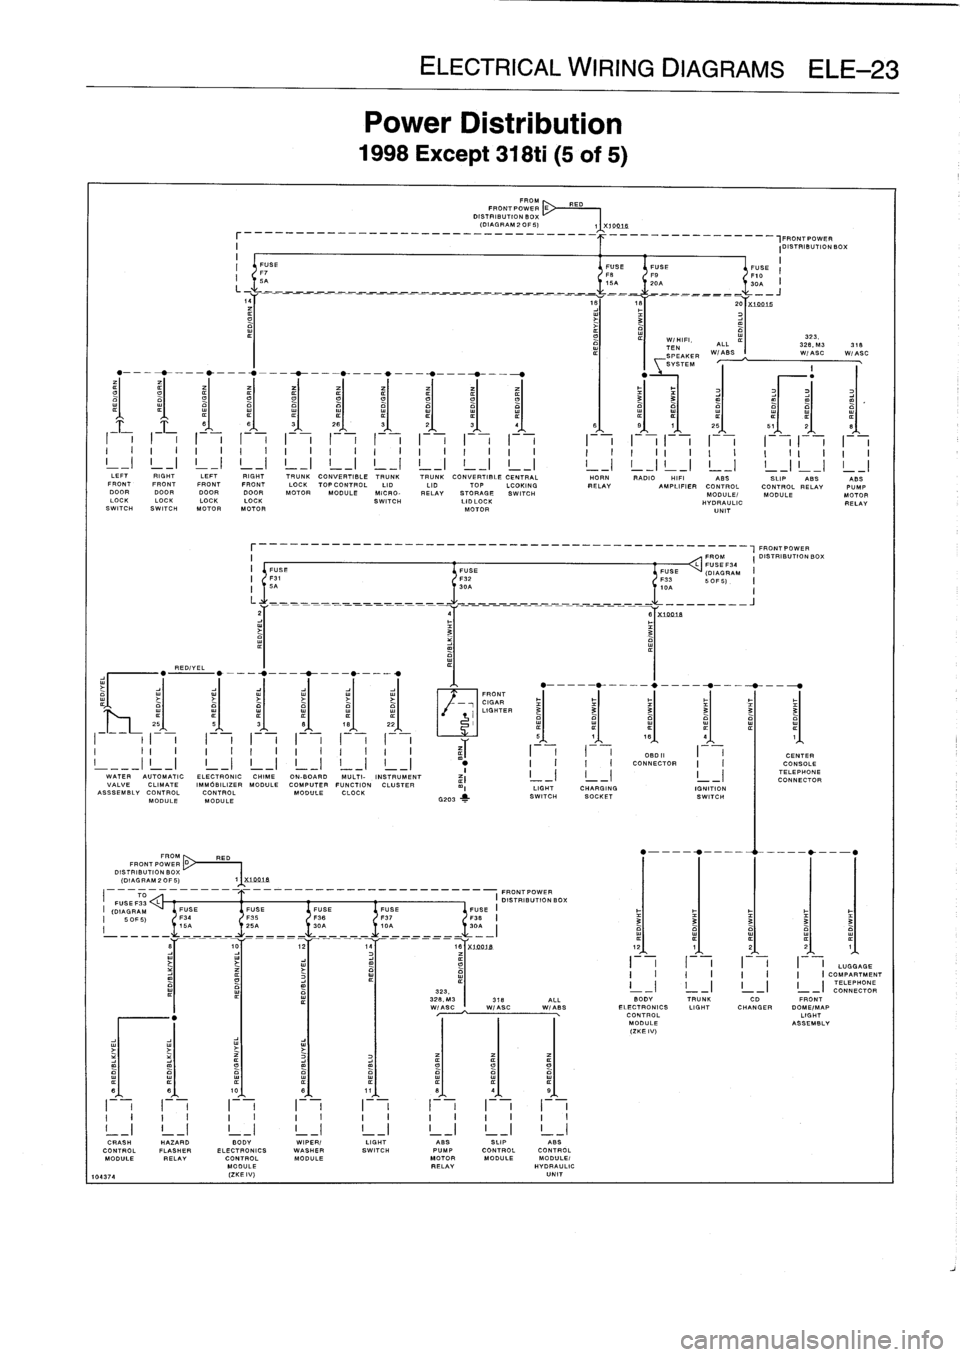 BMW 328i 1997 E36 Service Manual 
REDIYEL

FROM
RED
FRONT
PO
WE
R
D~
DISTRIBUTION
BOX
(DIAGRAM
2
OF
5)

_
_
_
_
_
_
_
_
_
_
__
,FRONTPOWER
I

	

IDISTRIBUTIONBOX
I

	

II
FUSE

	

FUSEFUSE

	

FUSE
F7

	

FS

	

FO

	

F10
I
I
5A

	
